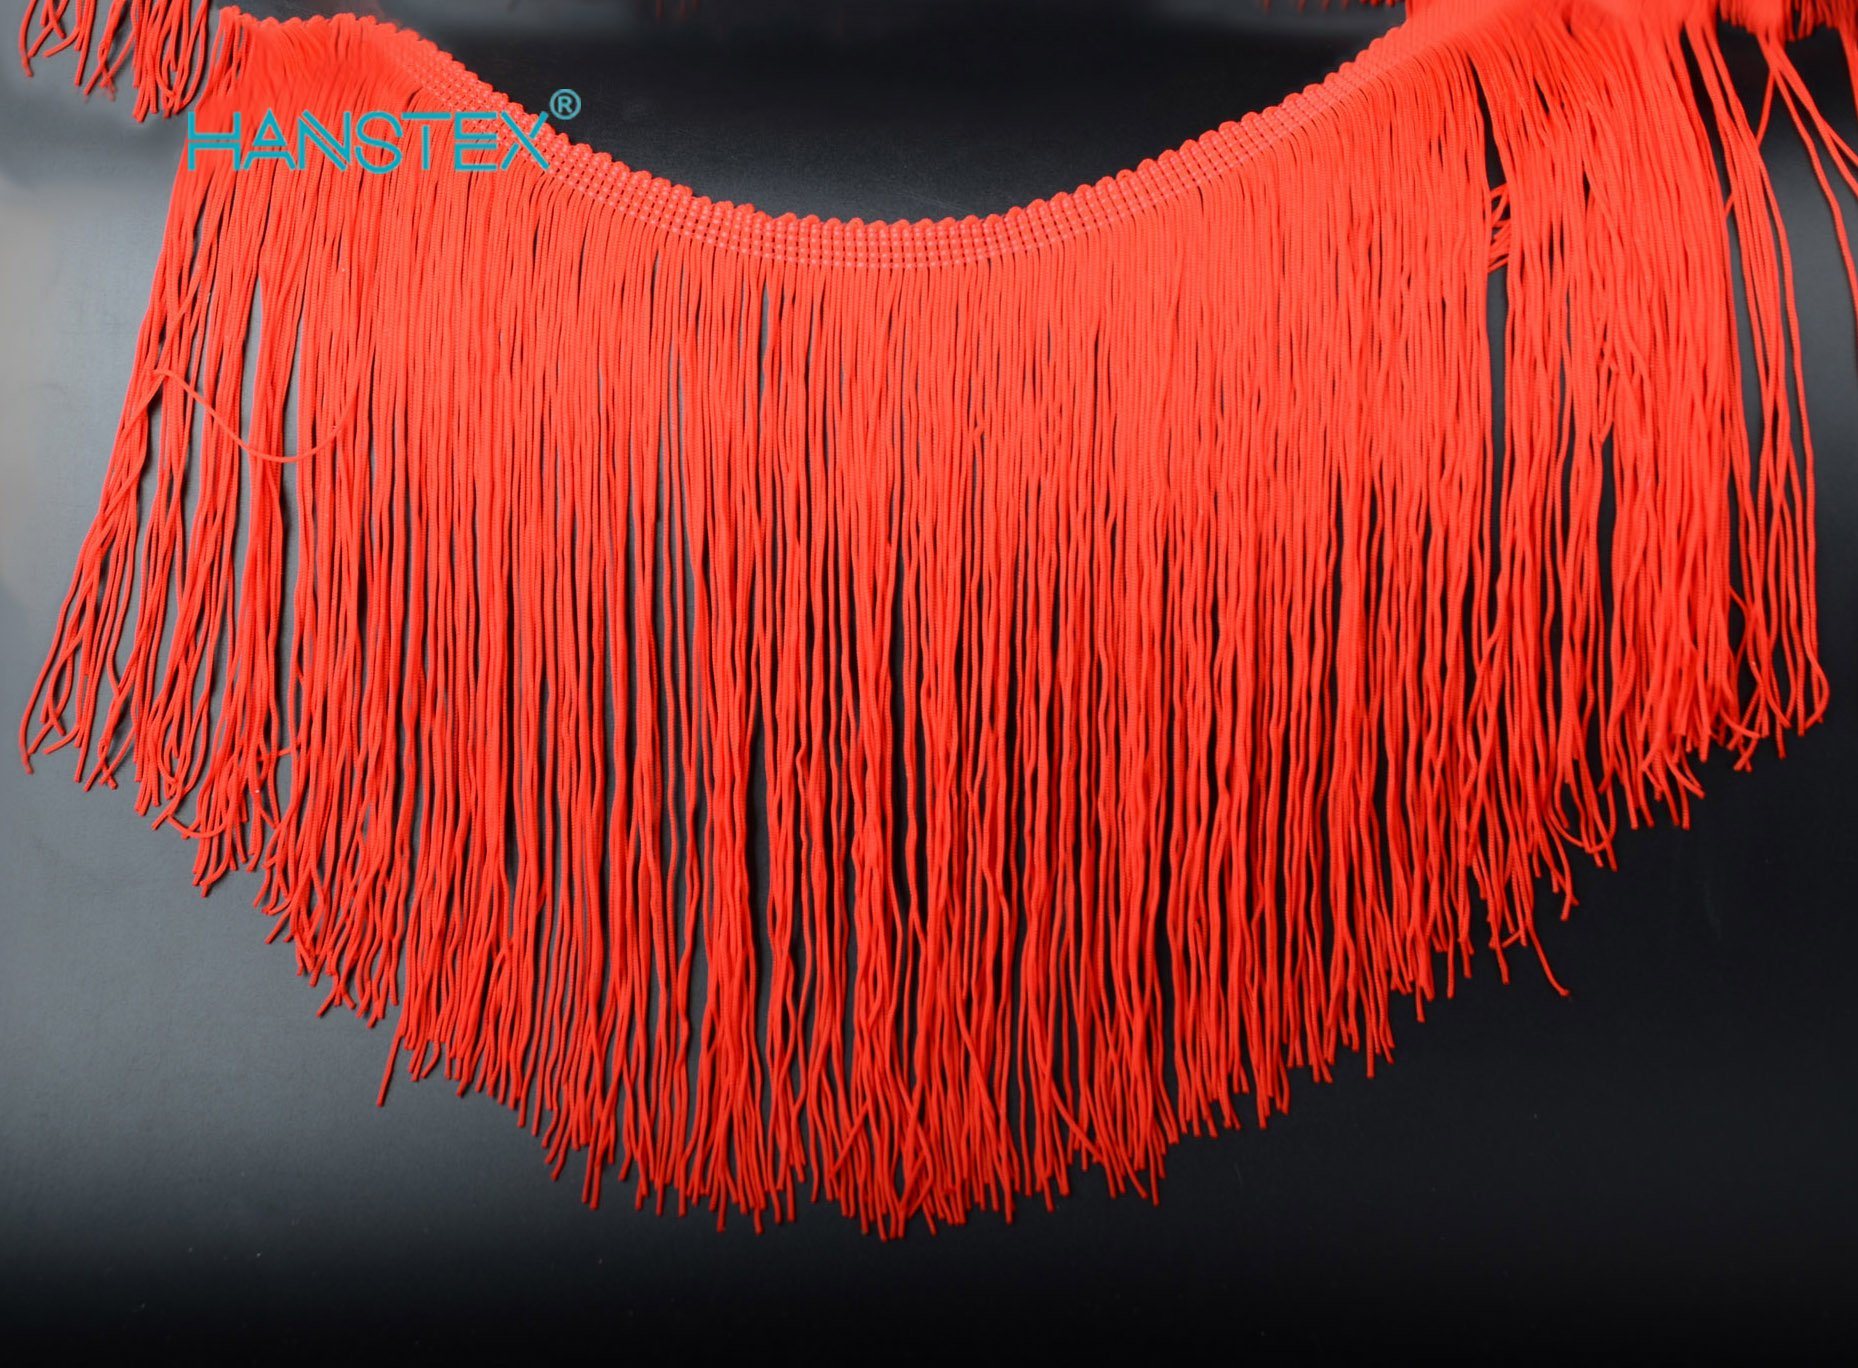 Hans Direct From China Factory Fancy Neon Fringe Trim